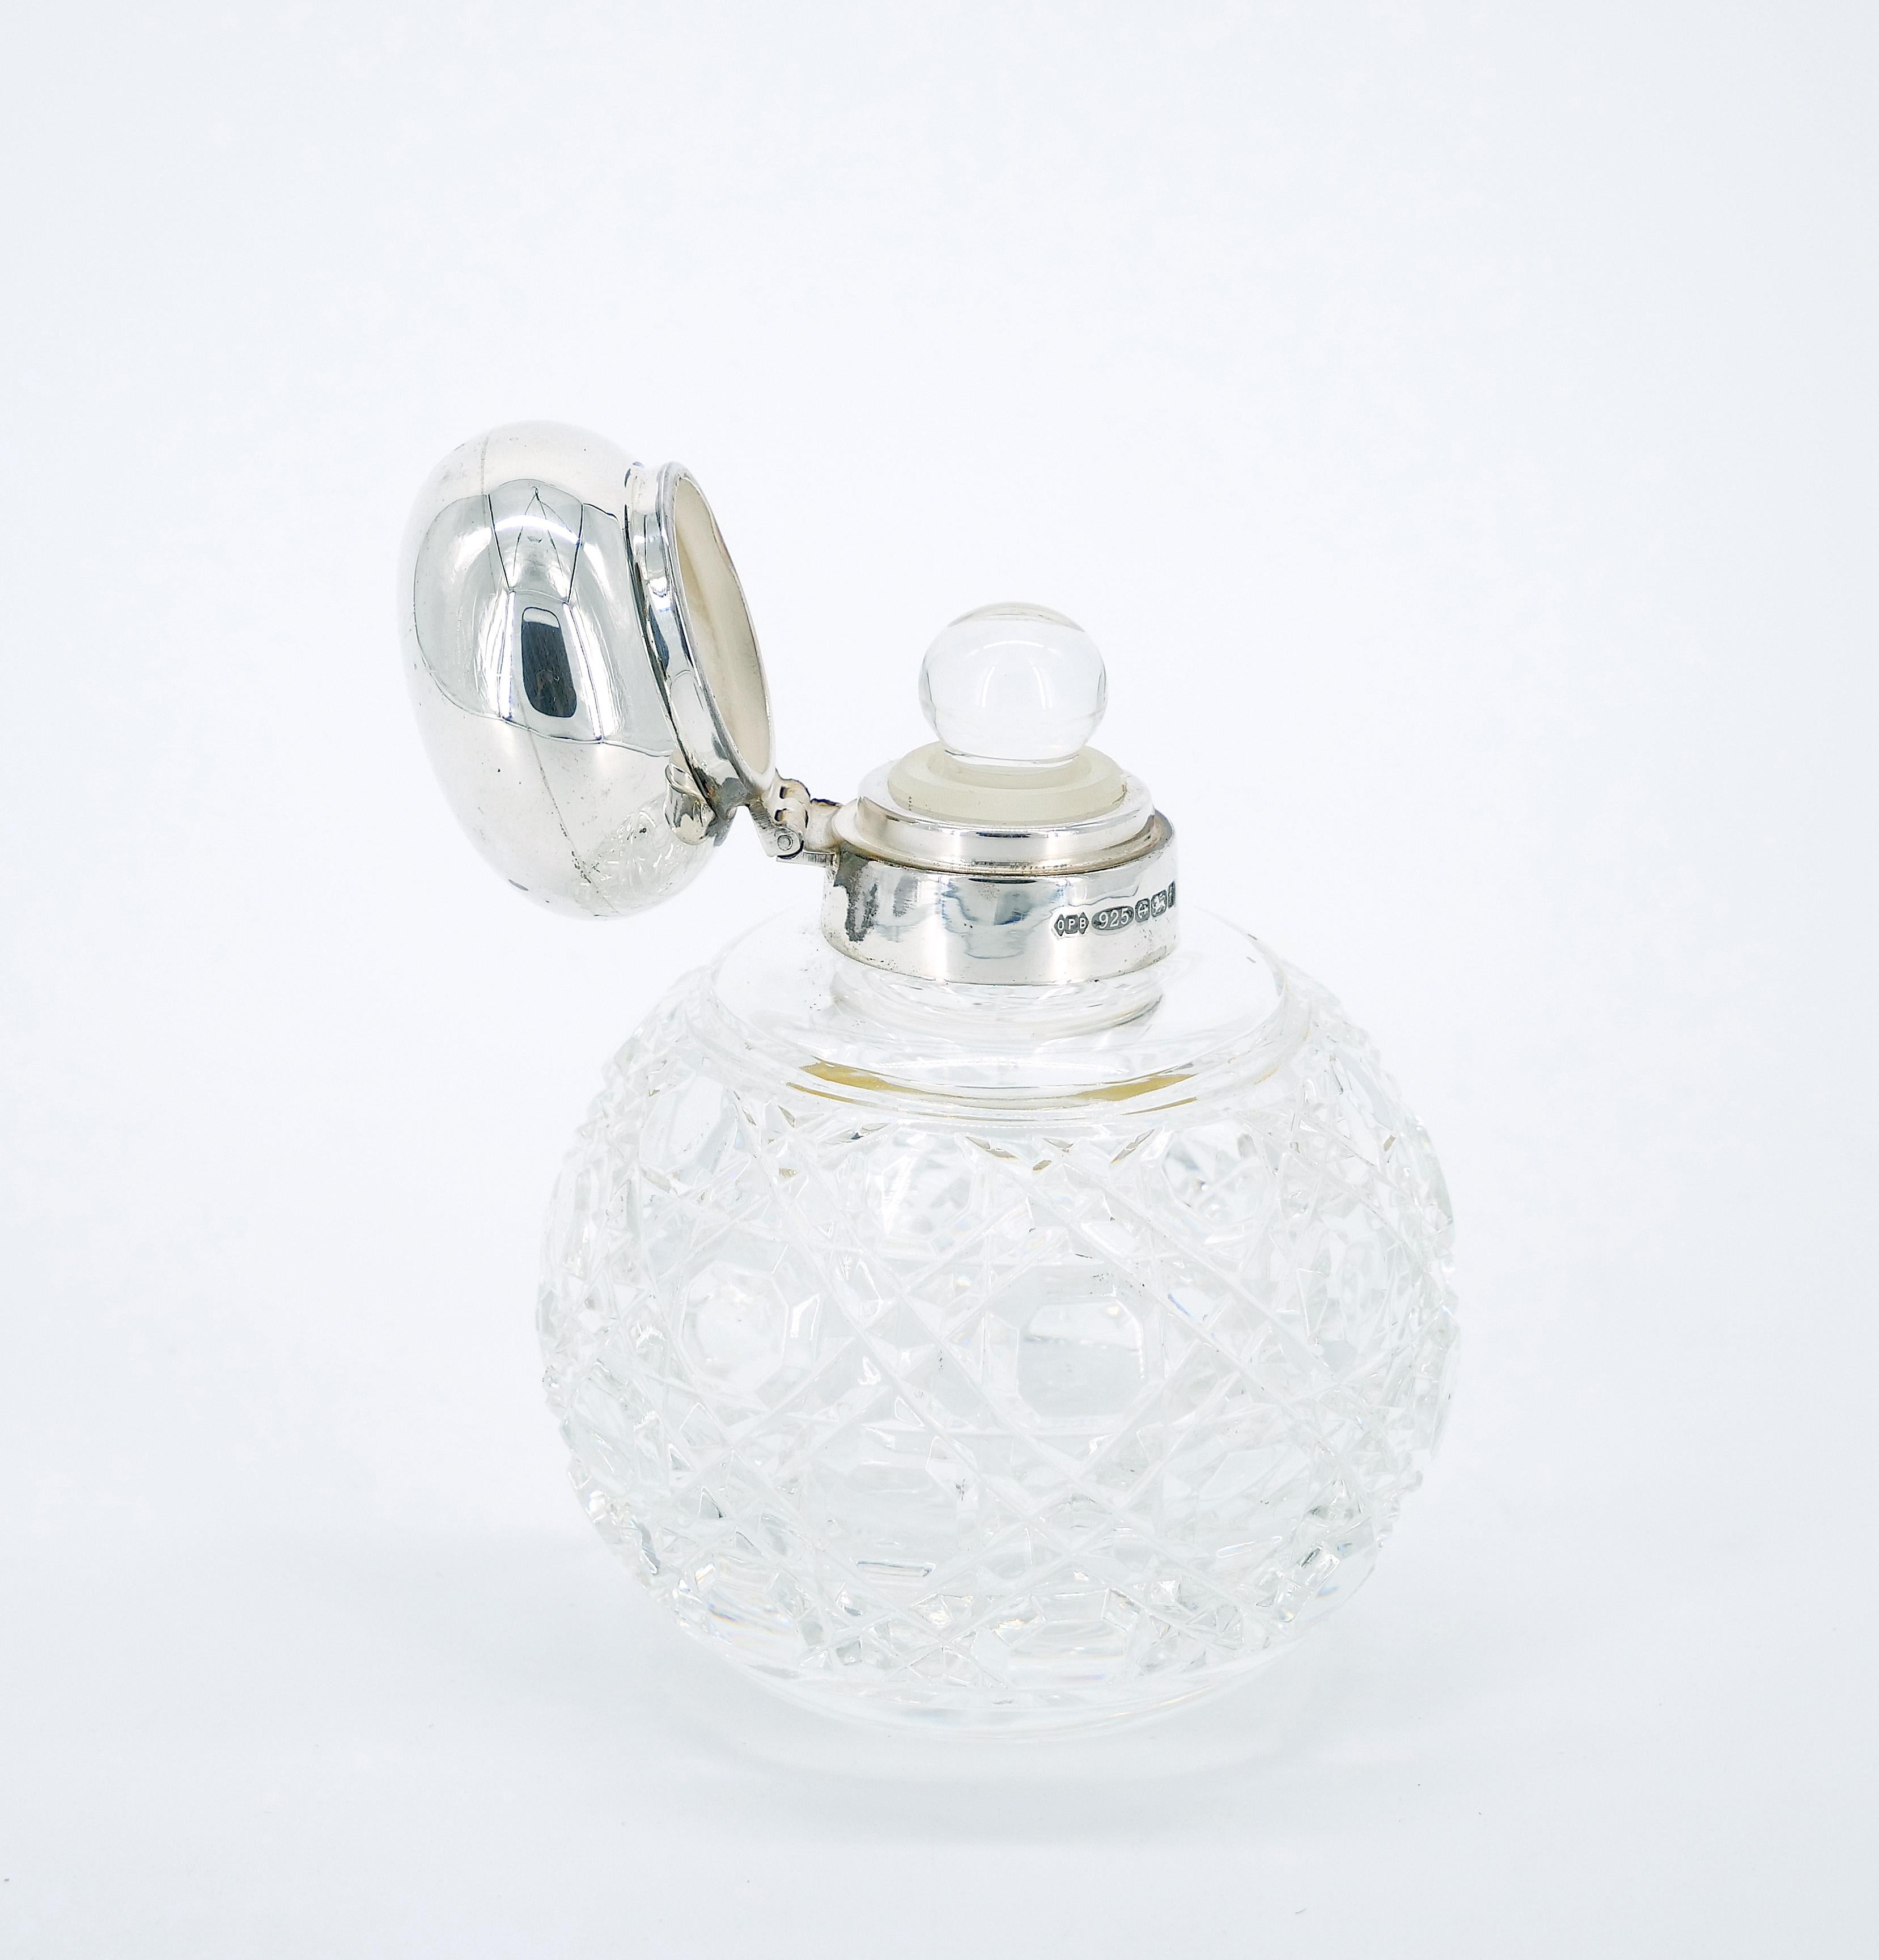 Transport yourself to the elegance of the 19th Century with this exquisite English Sterling Silver Covered Top and brilliant Cut Glass Perfume Bottle. The perfume bottle showcases a hobnail sterling silver top complemented by an engraved brilliant